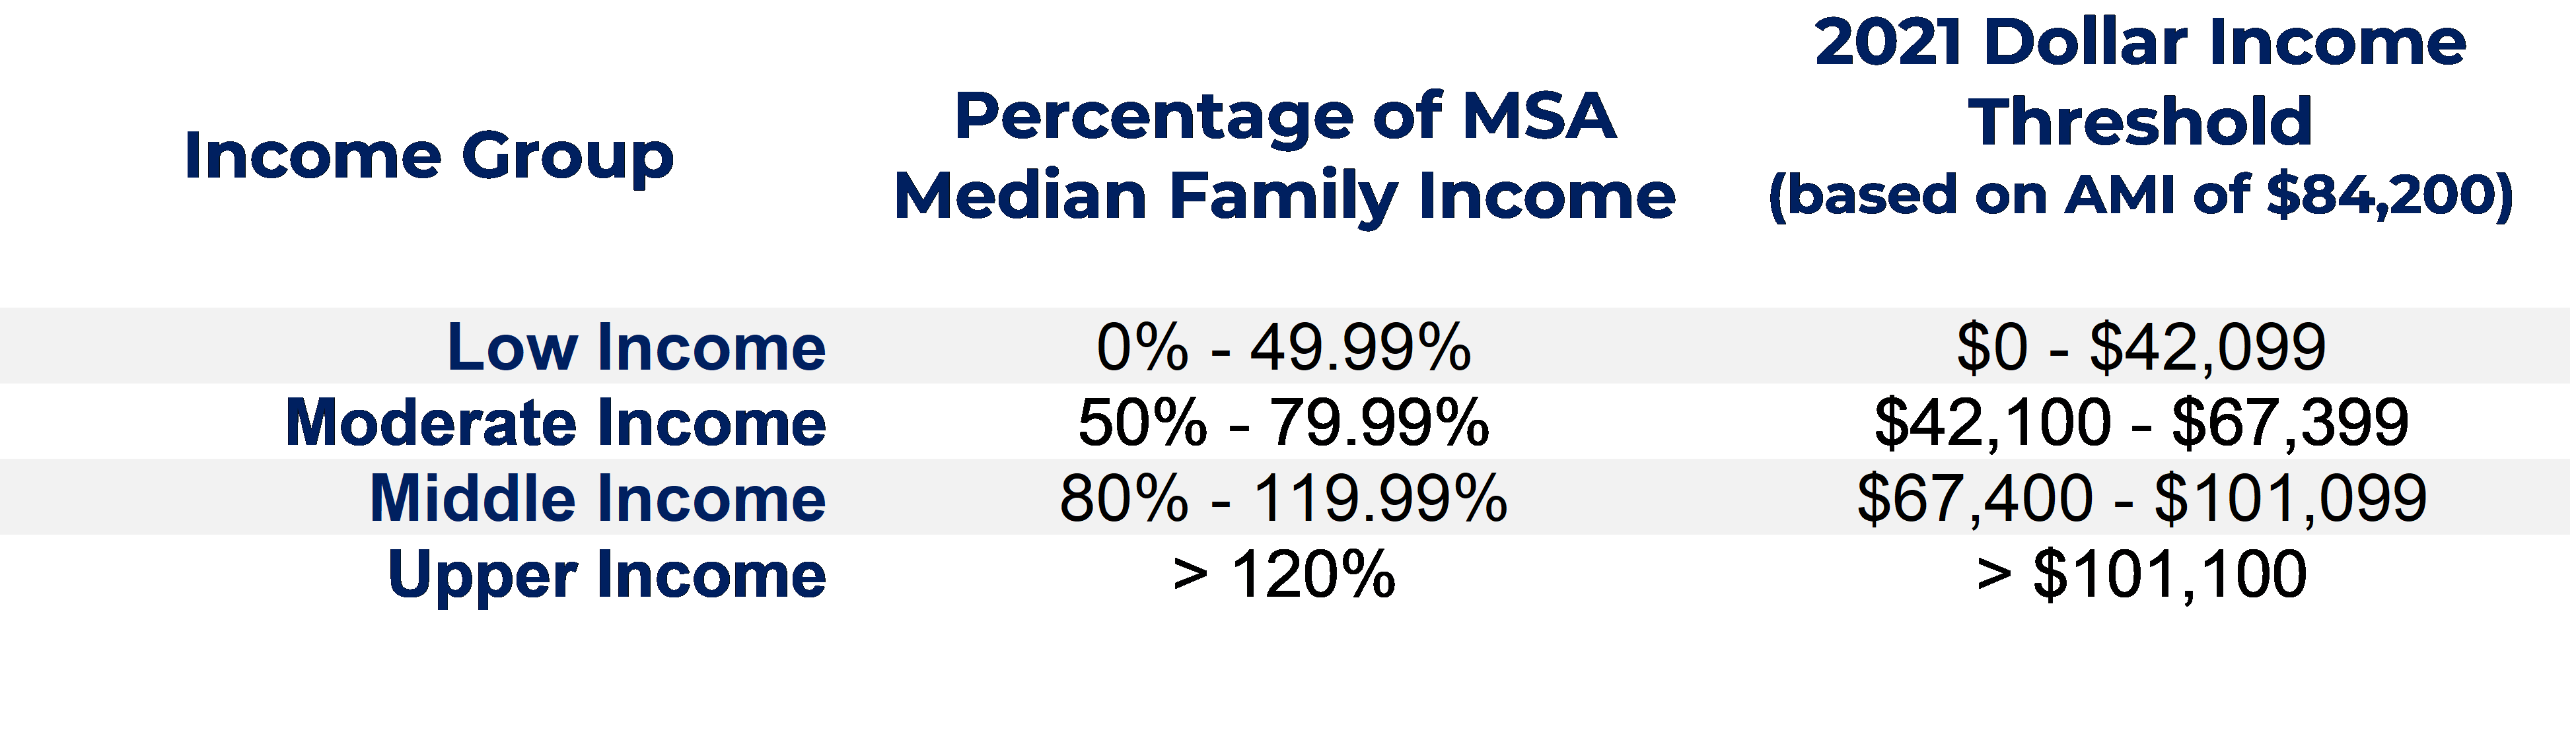 FFIEC Derived Area Median Income Brackets for Pittsburgh MSA 2021